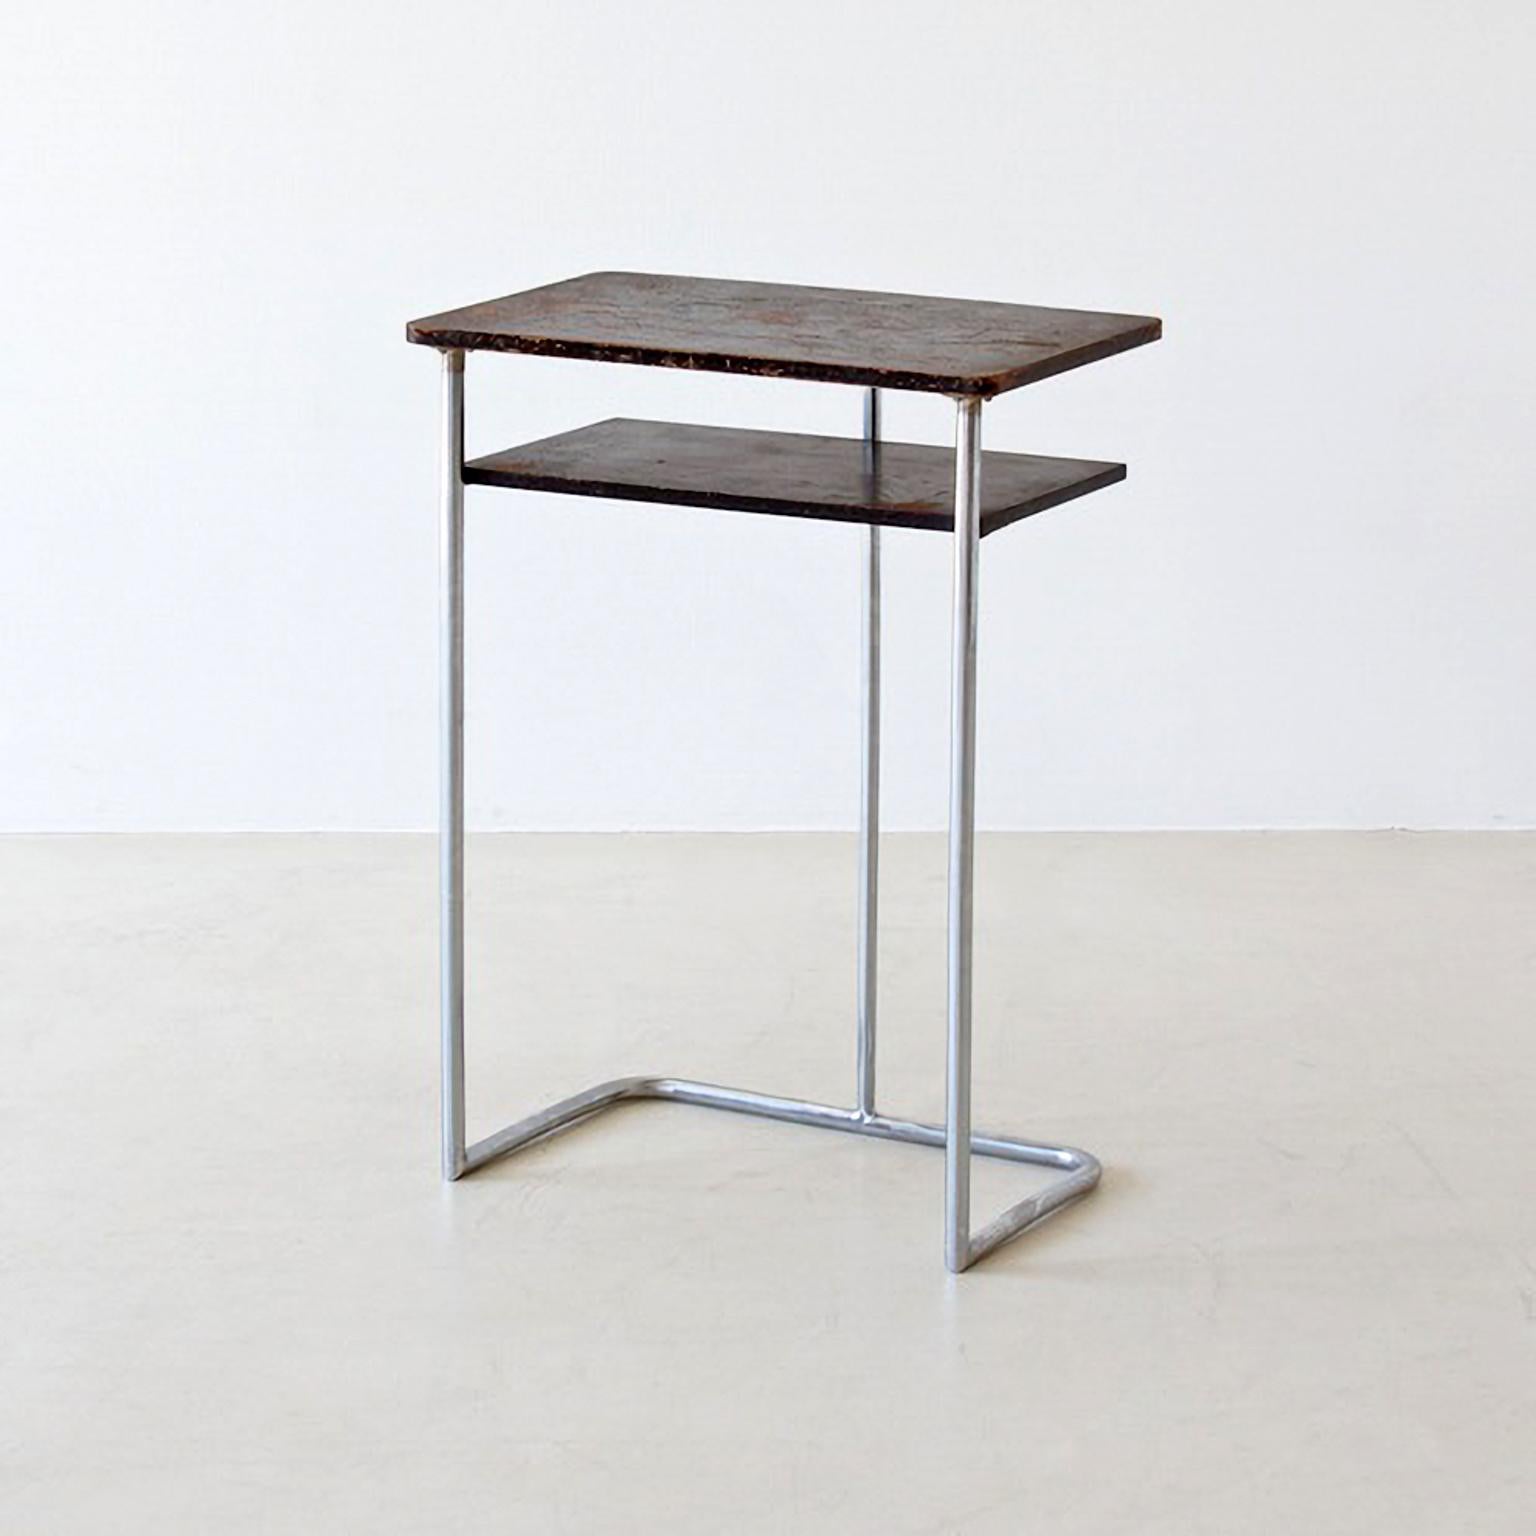 Small modernist writing table made of chrome plated tubular steel, stained/ veneered/ lacquered wood. The table can be customized and is available in different amounts. Delivery time 10-12 weeks.